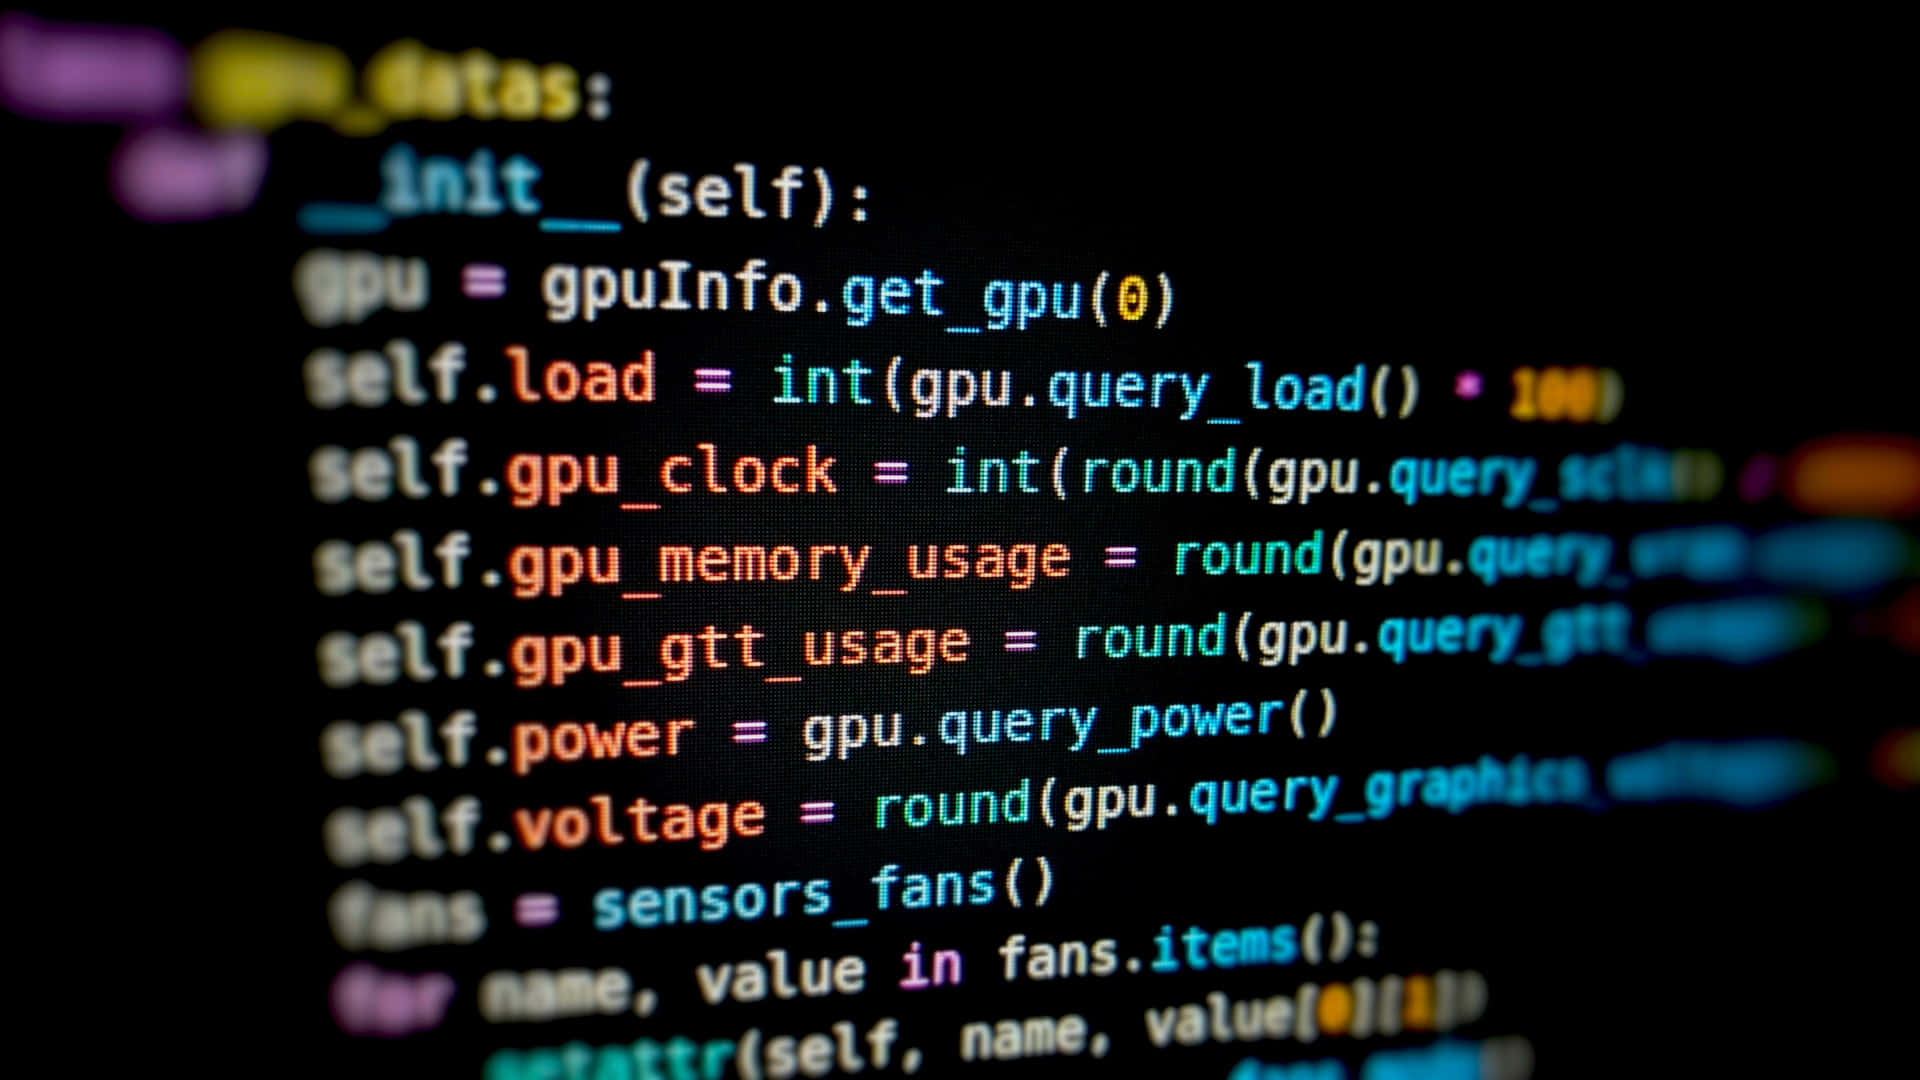 200+] Coding Backgrounds